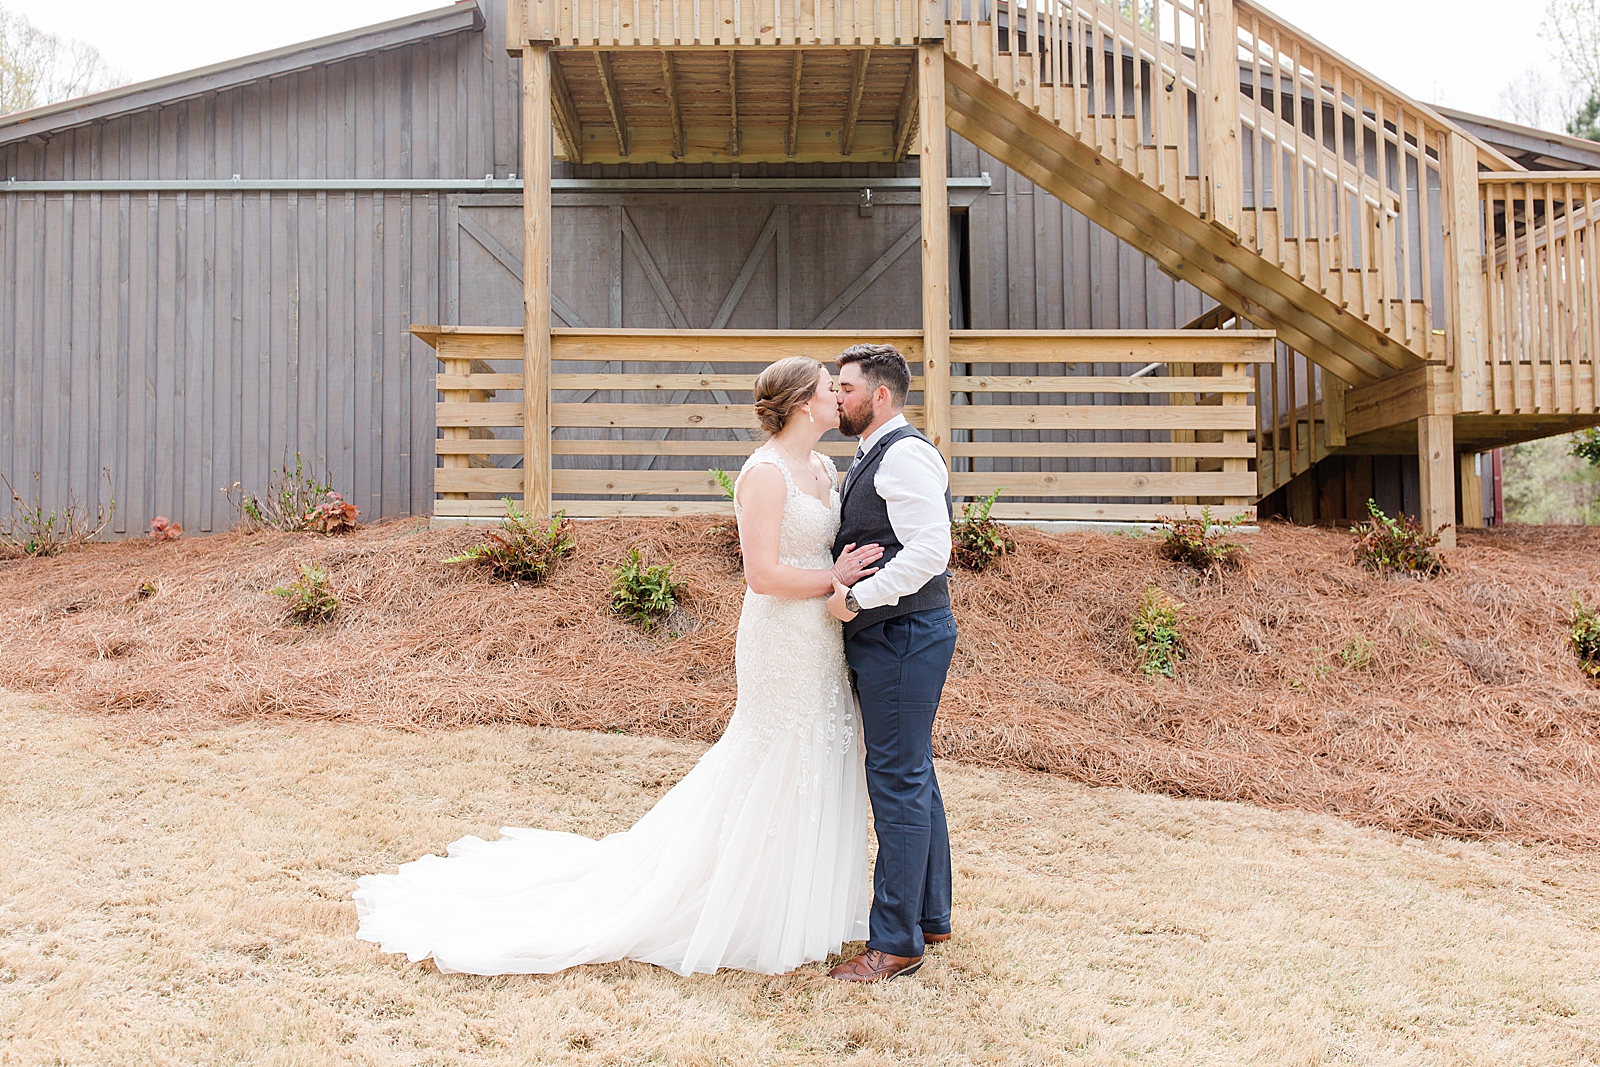 Macedonia Hills Wedding Bride and Groom's First Look Kissing Photo